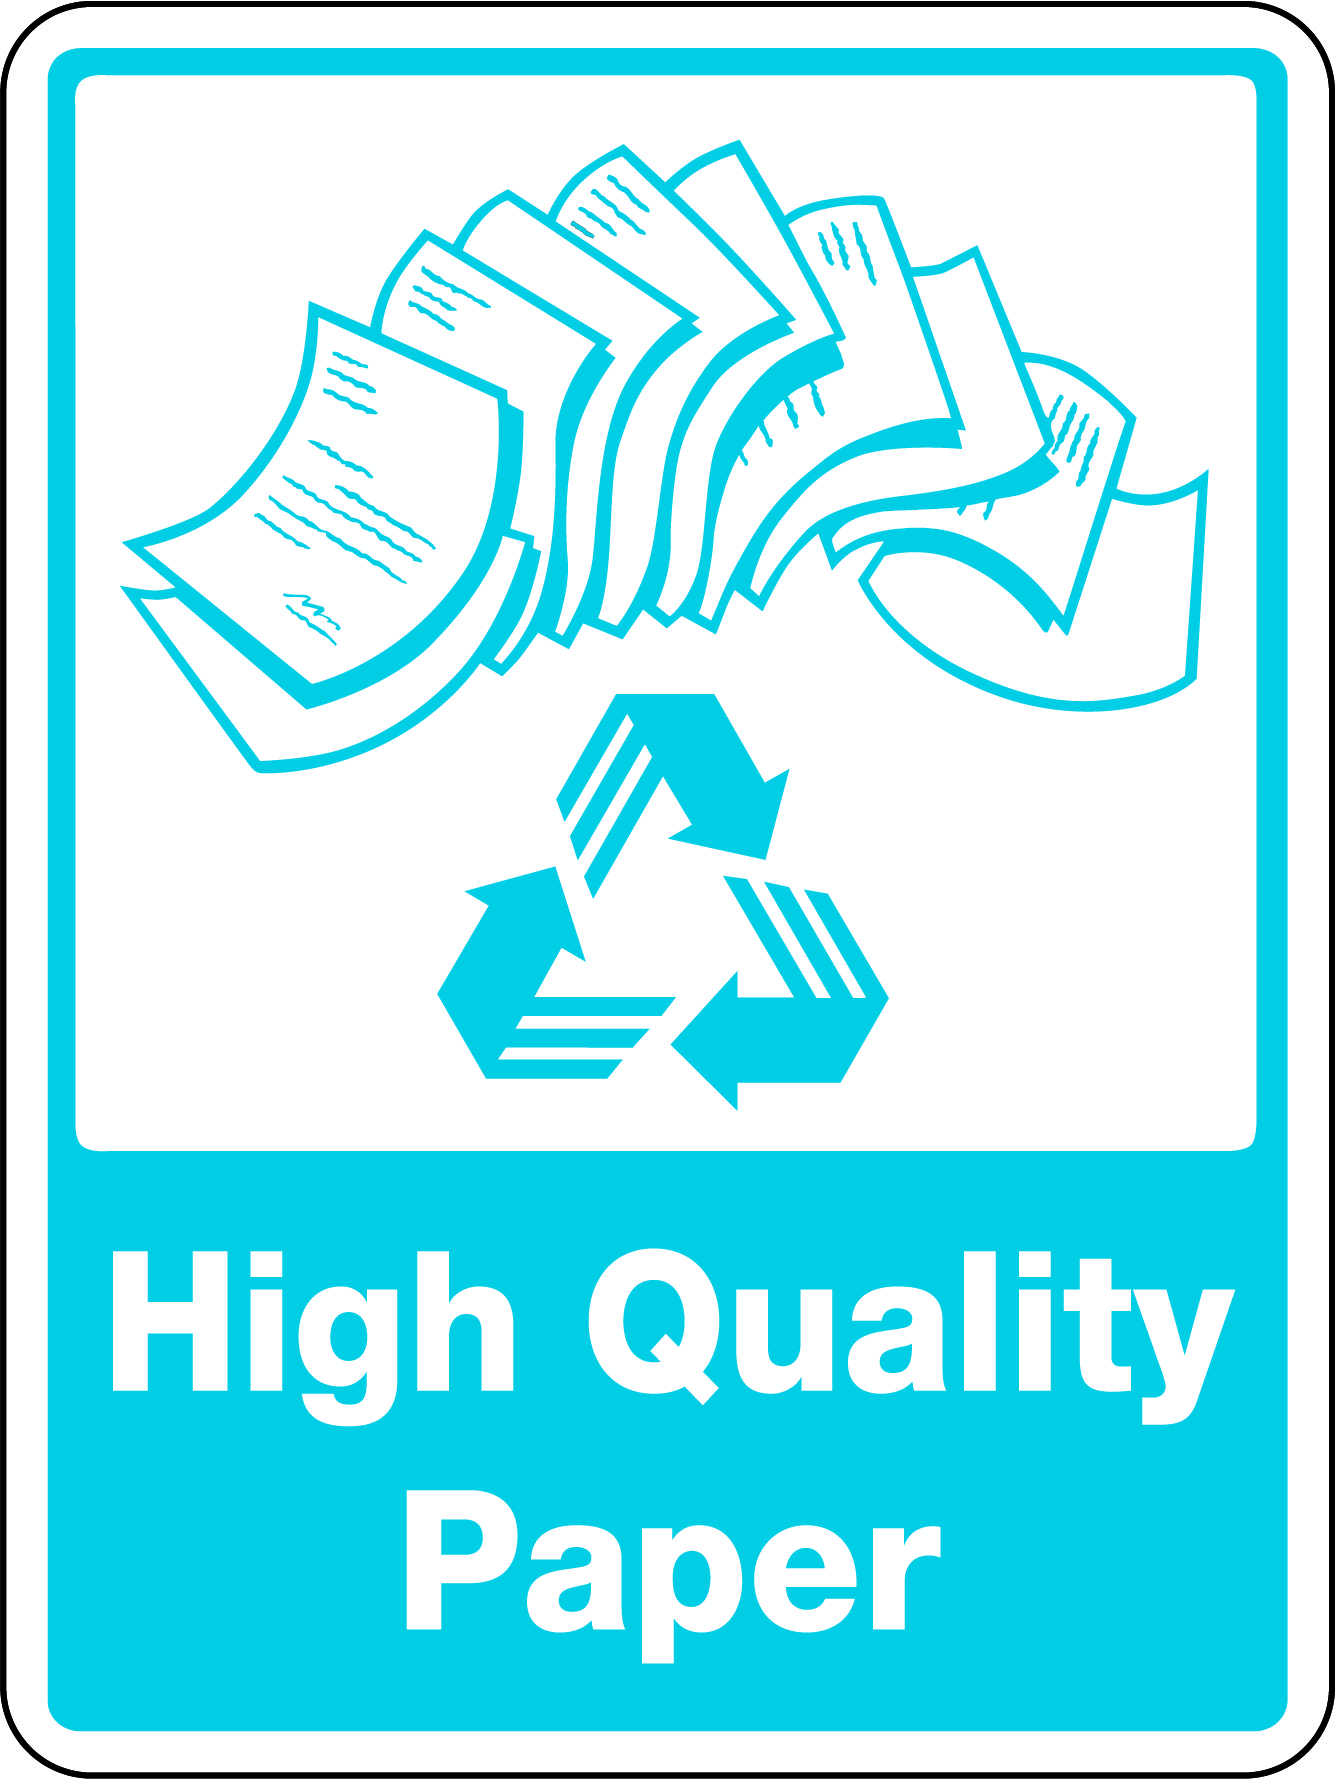 SIGN 300 X 225MM SELF ADHESIVE HIGH QUALITY PAPER [WITH RECYCLING PICTO]